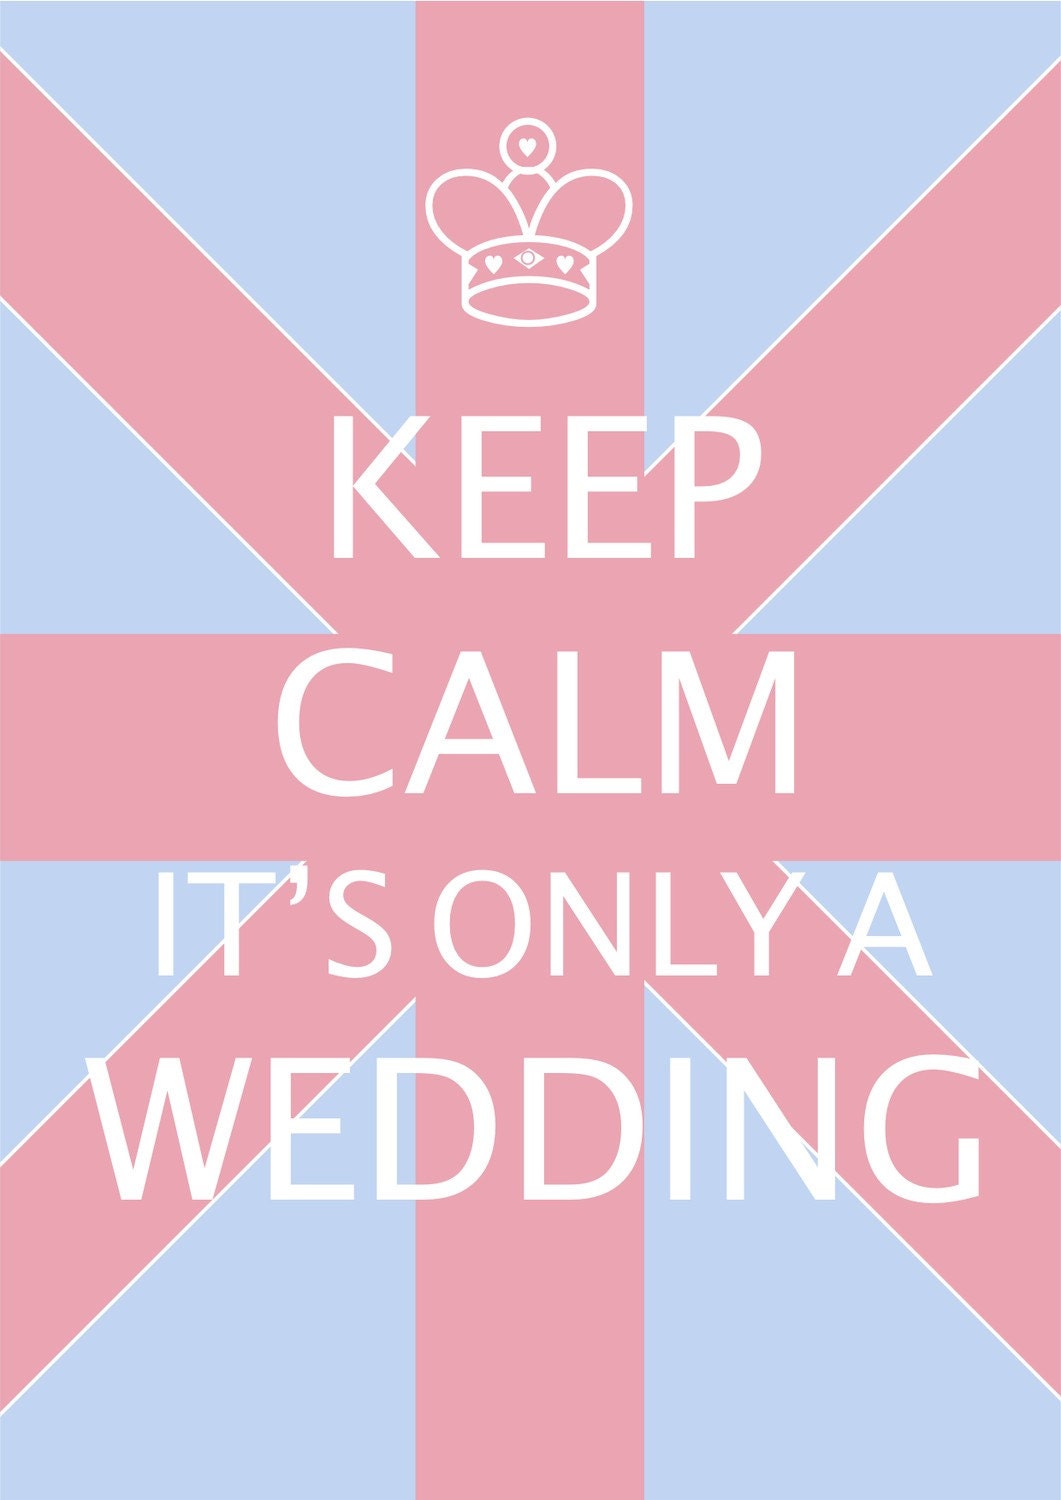 Keep Calm It's Only A Wedding Union Jack Postcard (Pastel Pink)